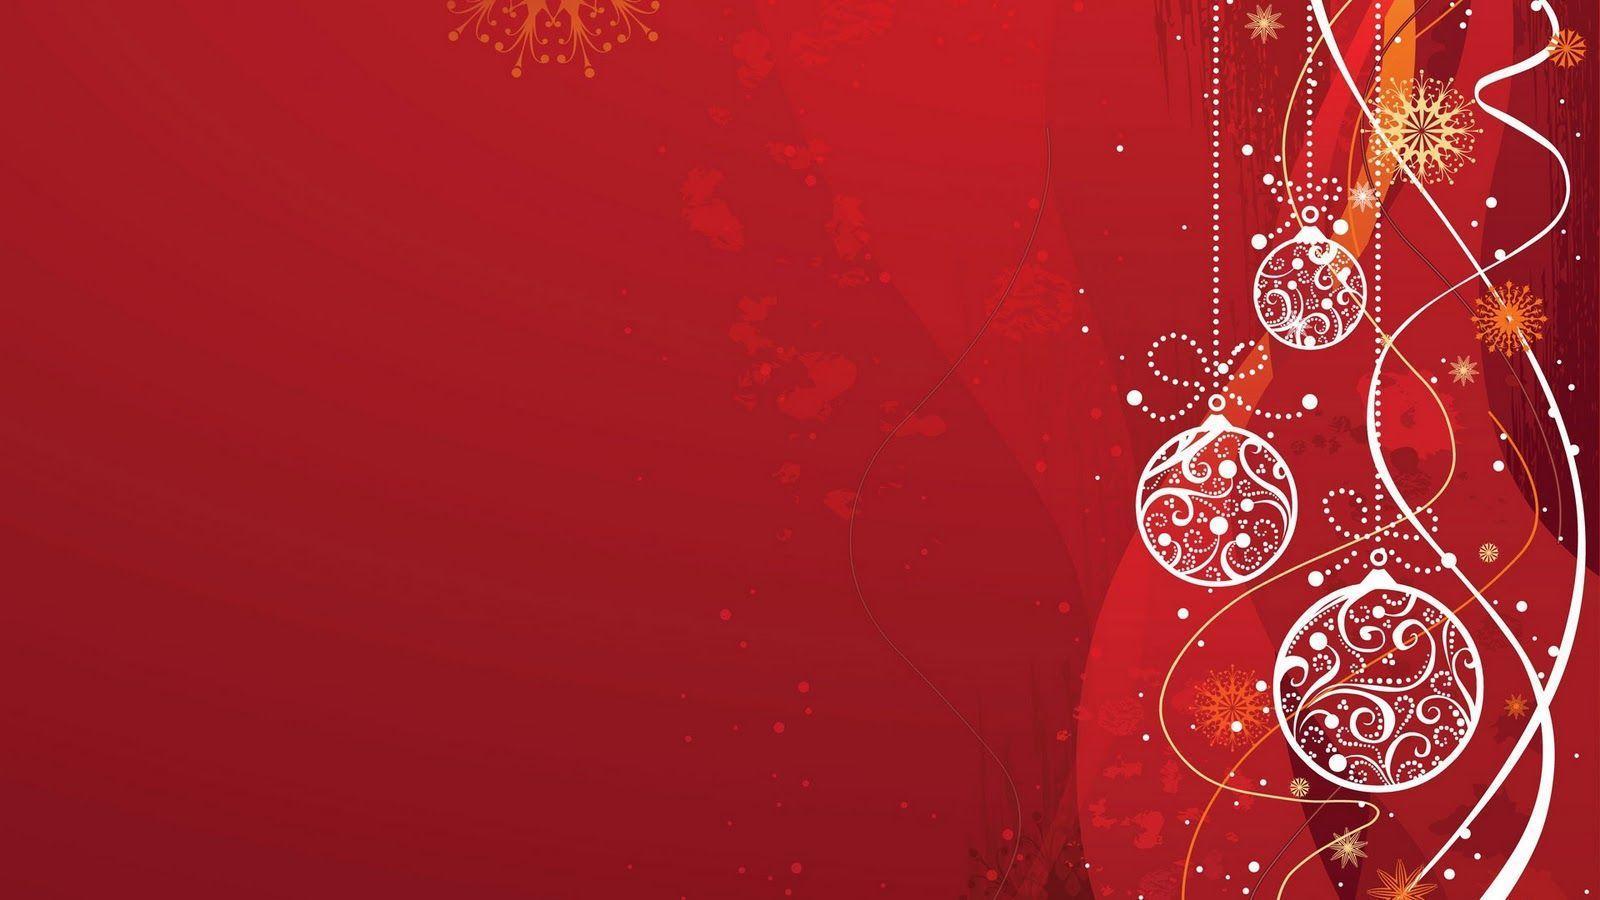 Xmas Stuff For > Red Christmas Background